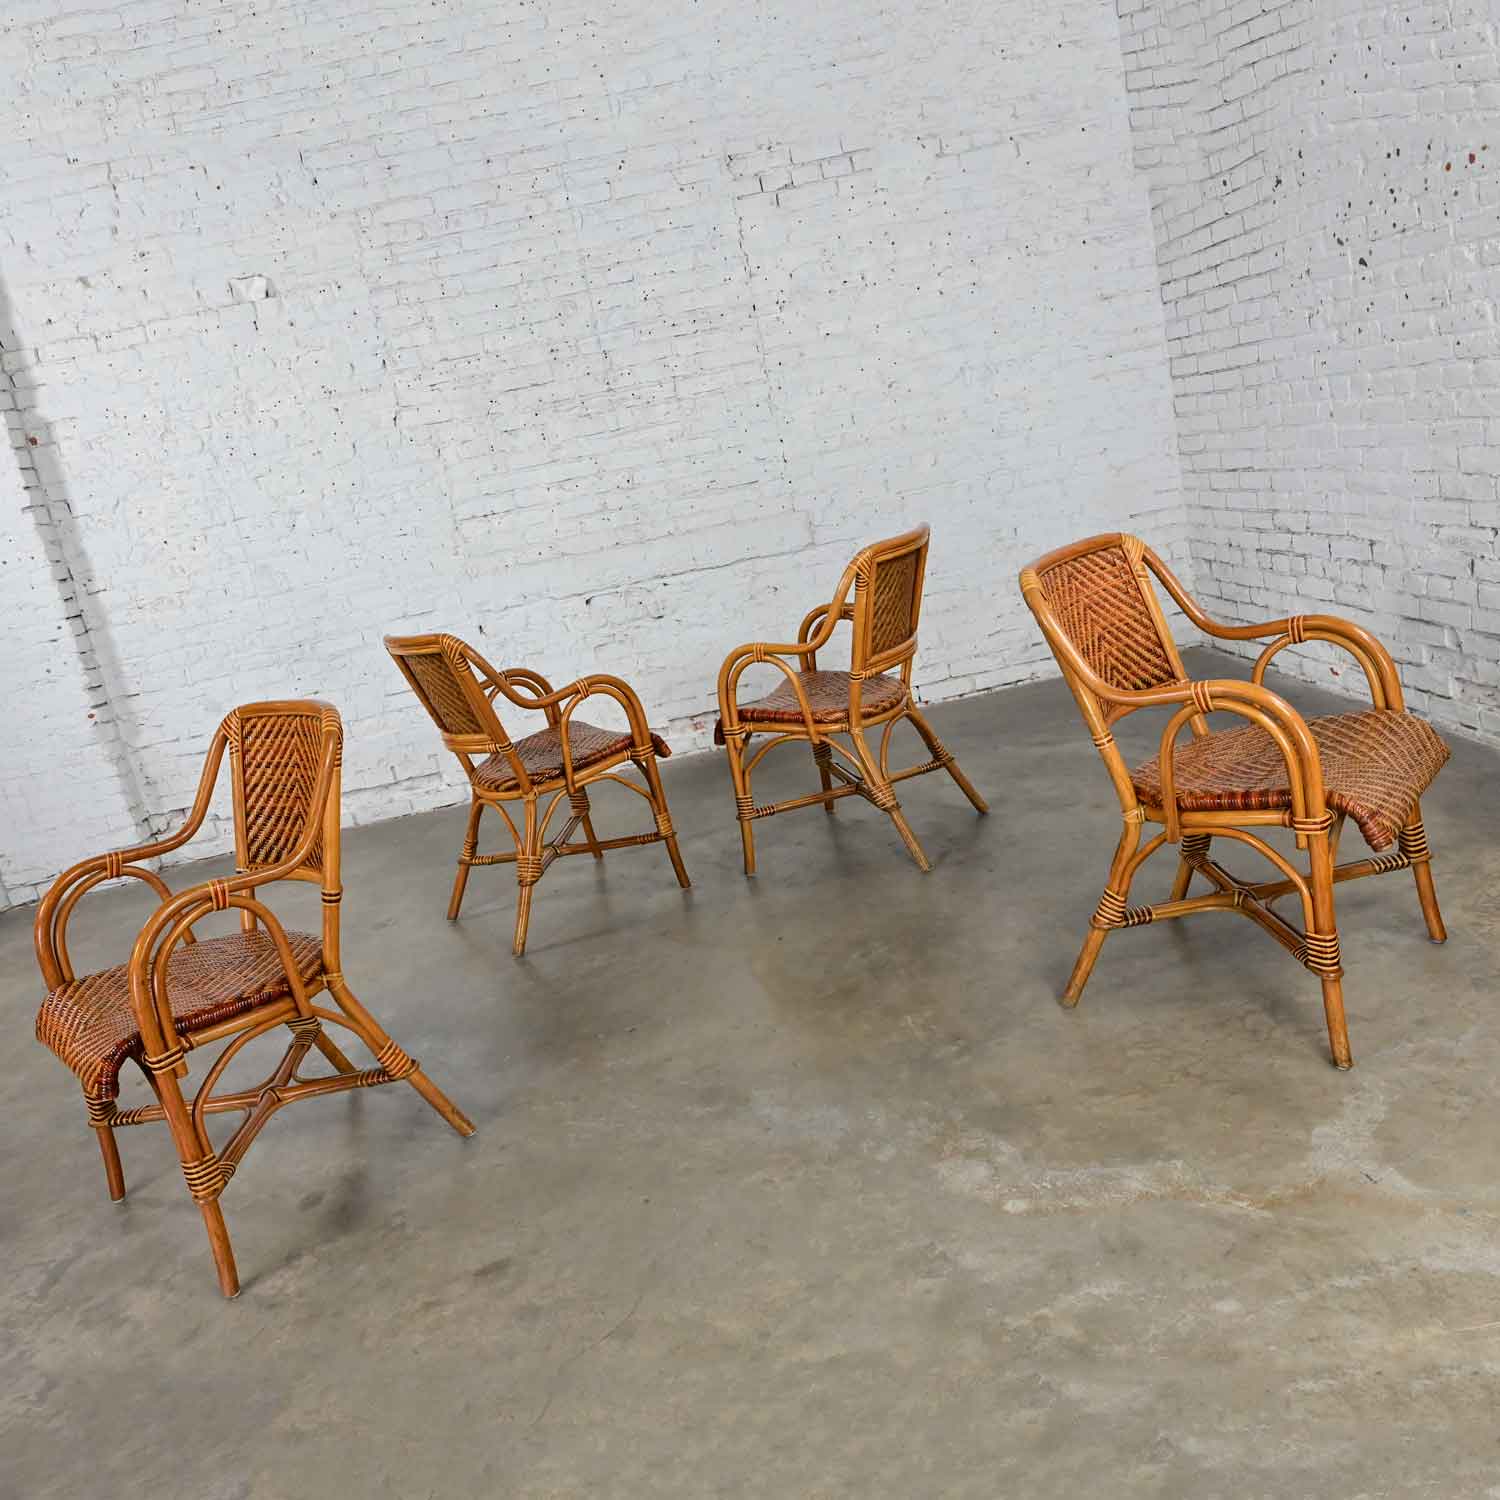 Late 20th Century Boho Chic 2 Toned Wicker Rattan Café Bistro or Conservatory Armchairs Set of 4